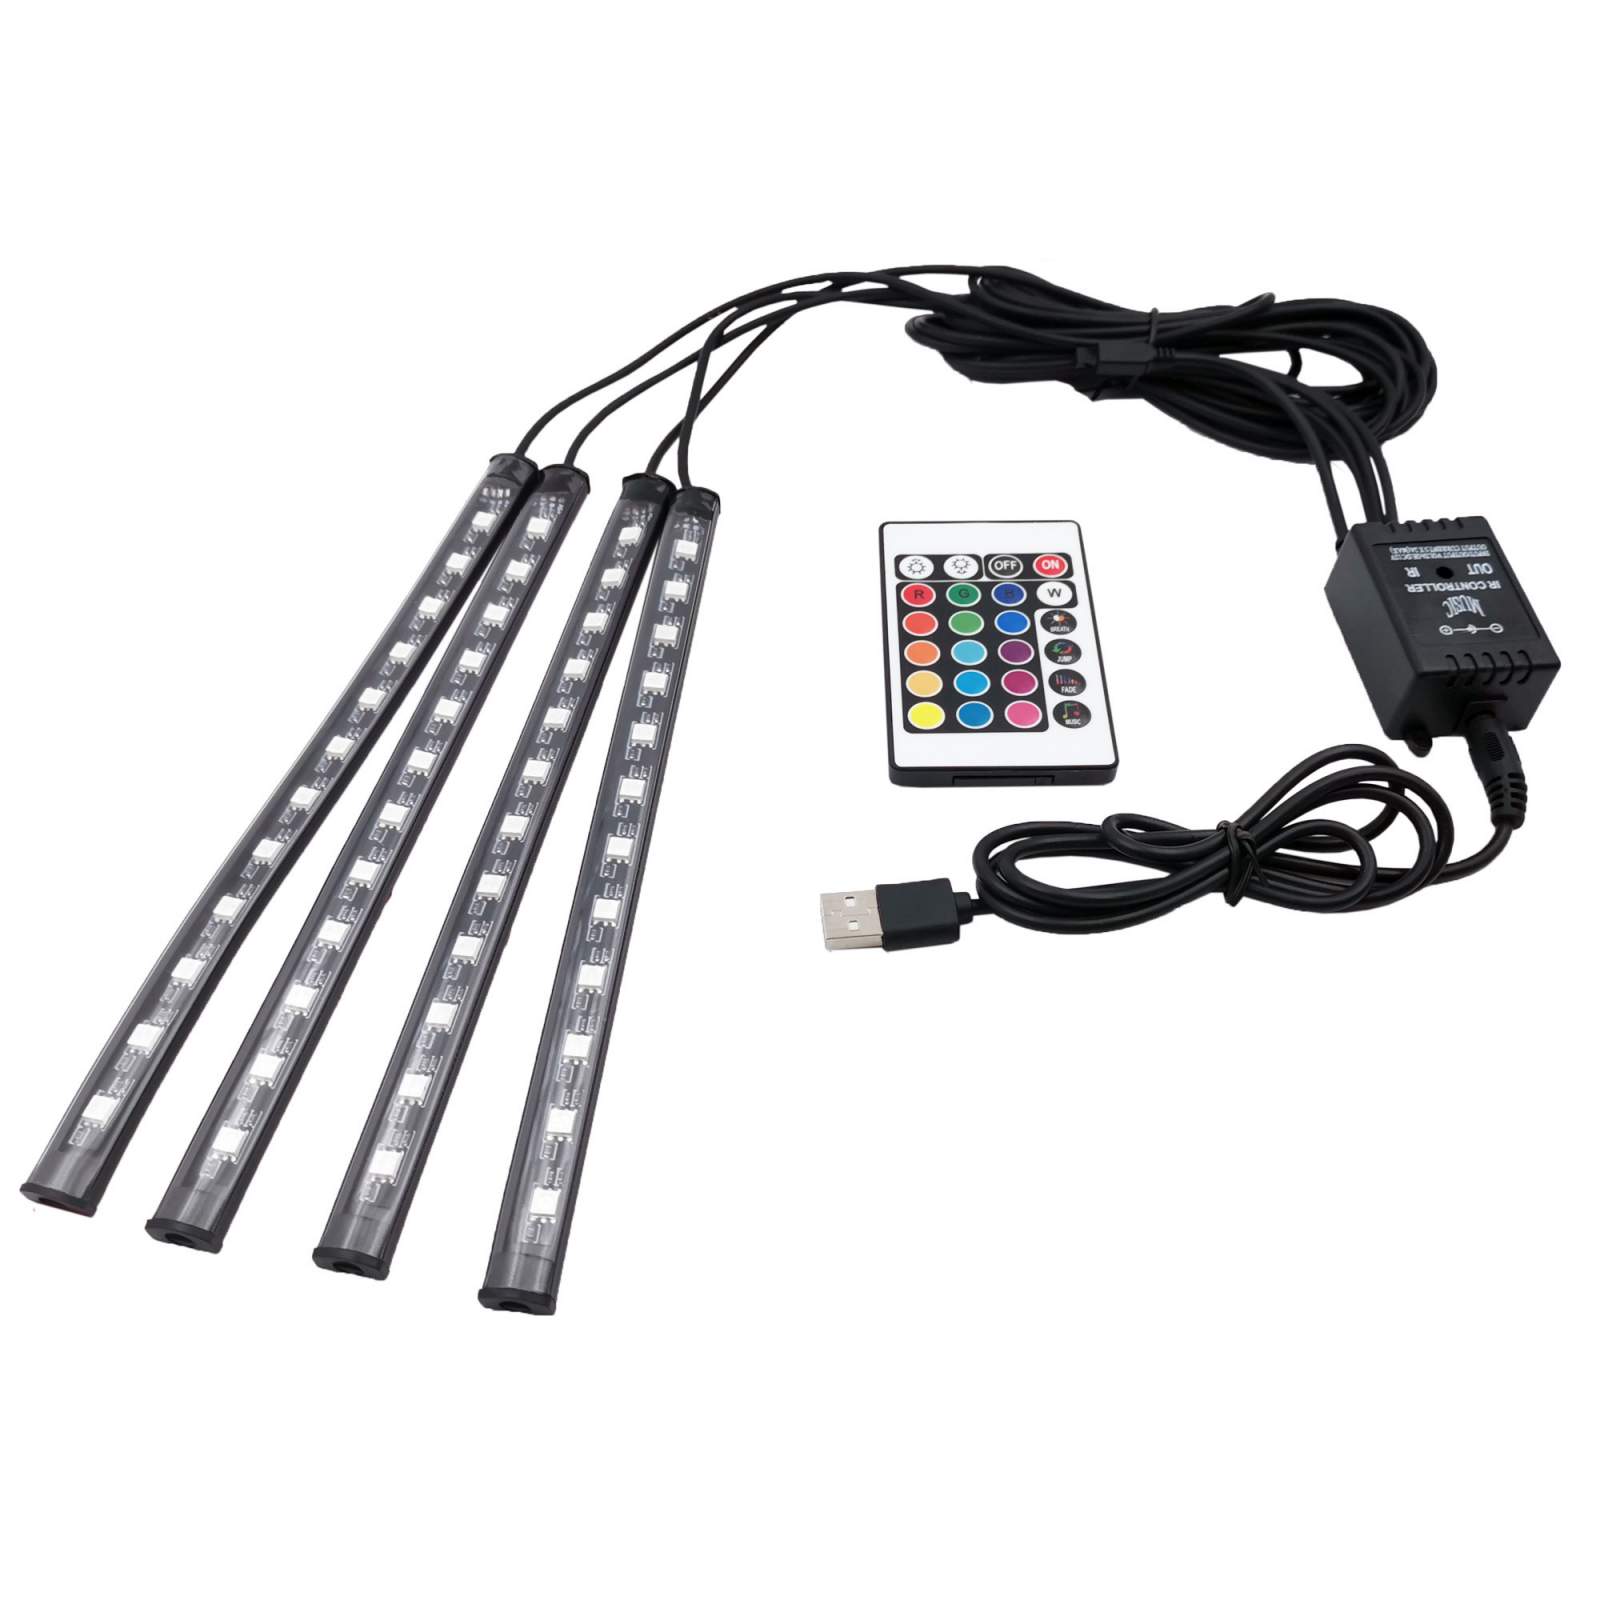 Foresight Car LED USB Strip Light - 4pcs 48 LED Multicolor - with Remote -  Foresight